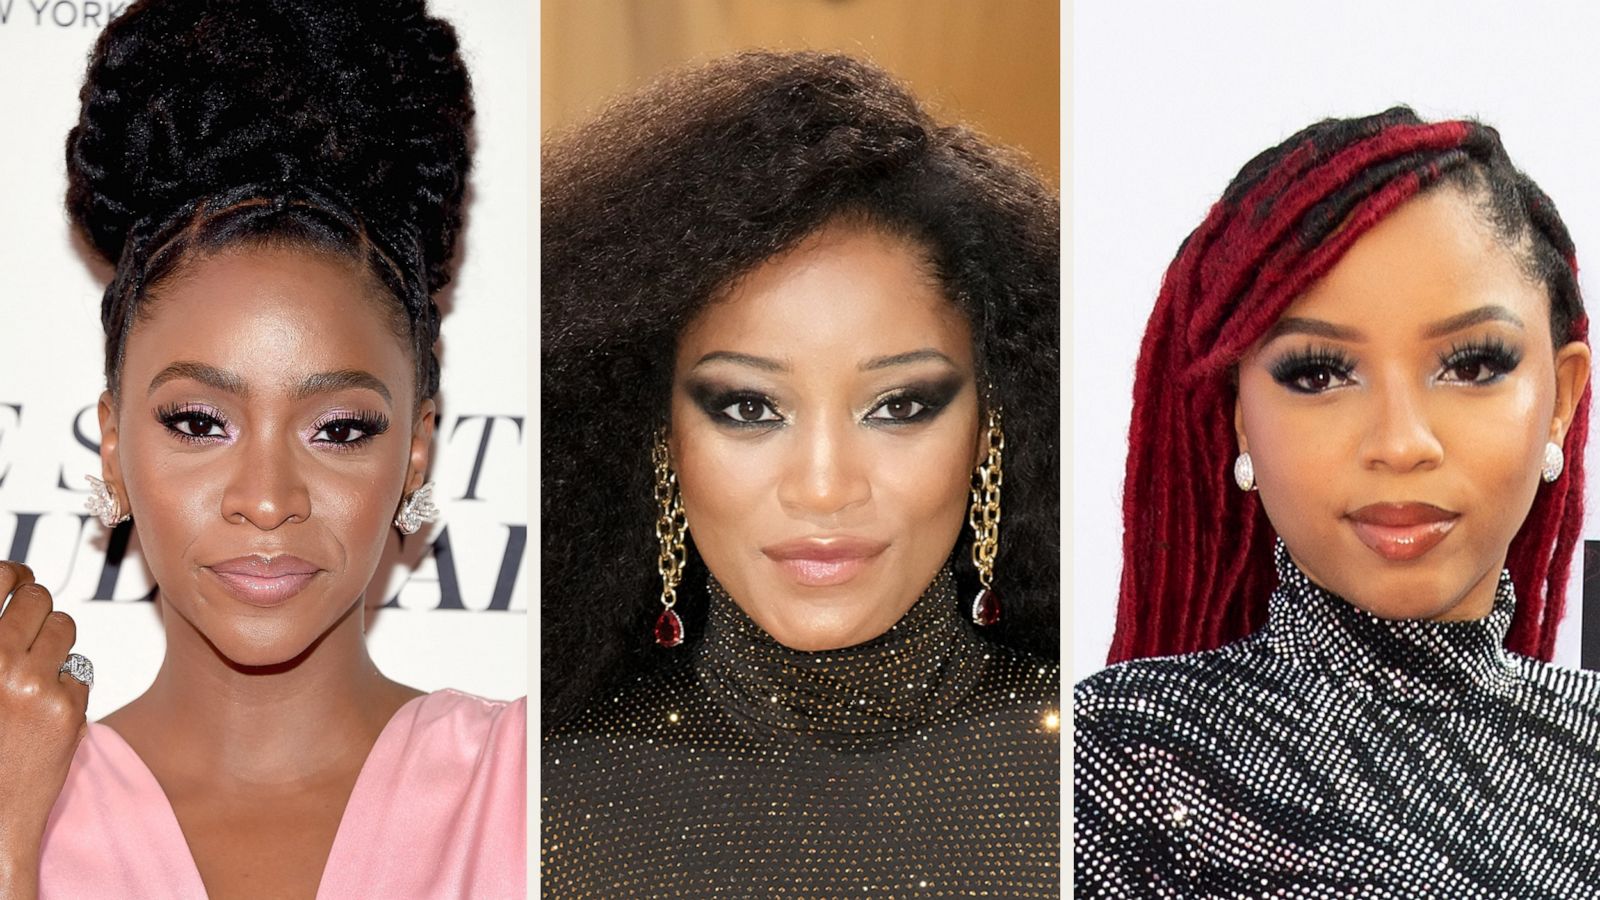 PHOTO: Teyonah Parris, Keke Palmer and Chloe Bailey are seen in composited file images.